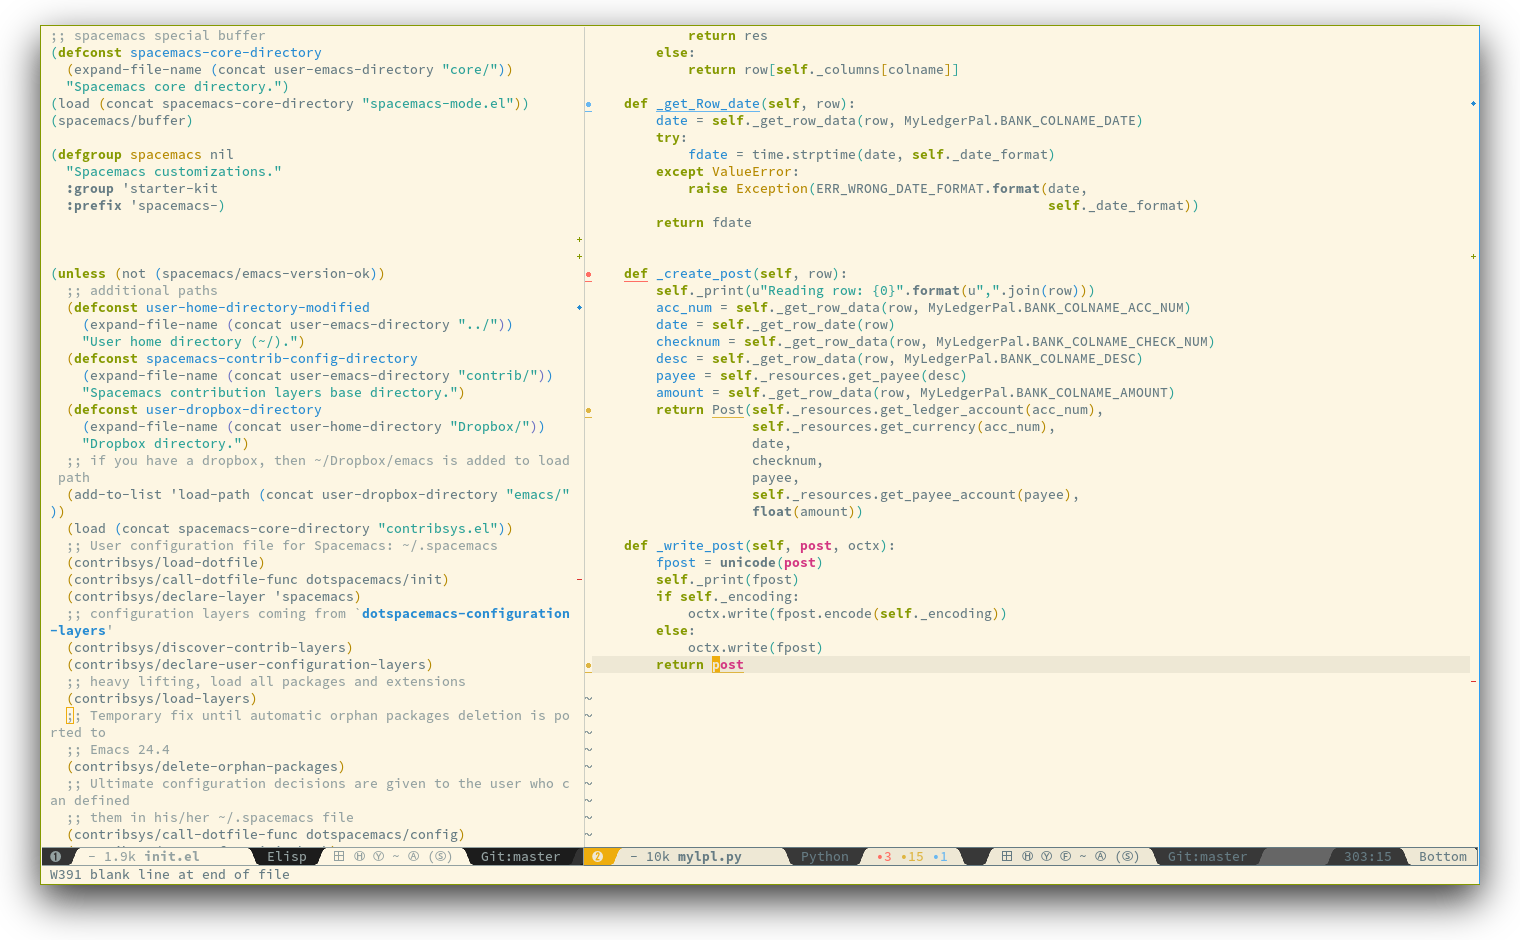 /TakeV/spacemacs/media/commit/61c97b7dda59edee607ce01df927bea5650843e4/doc/img/spacemacs-python.png